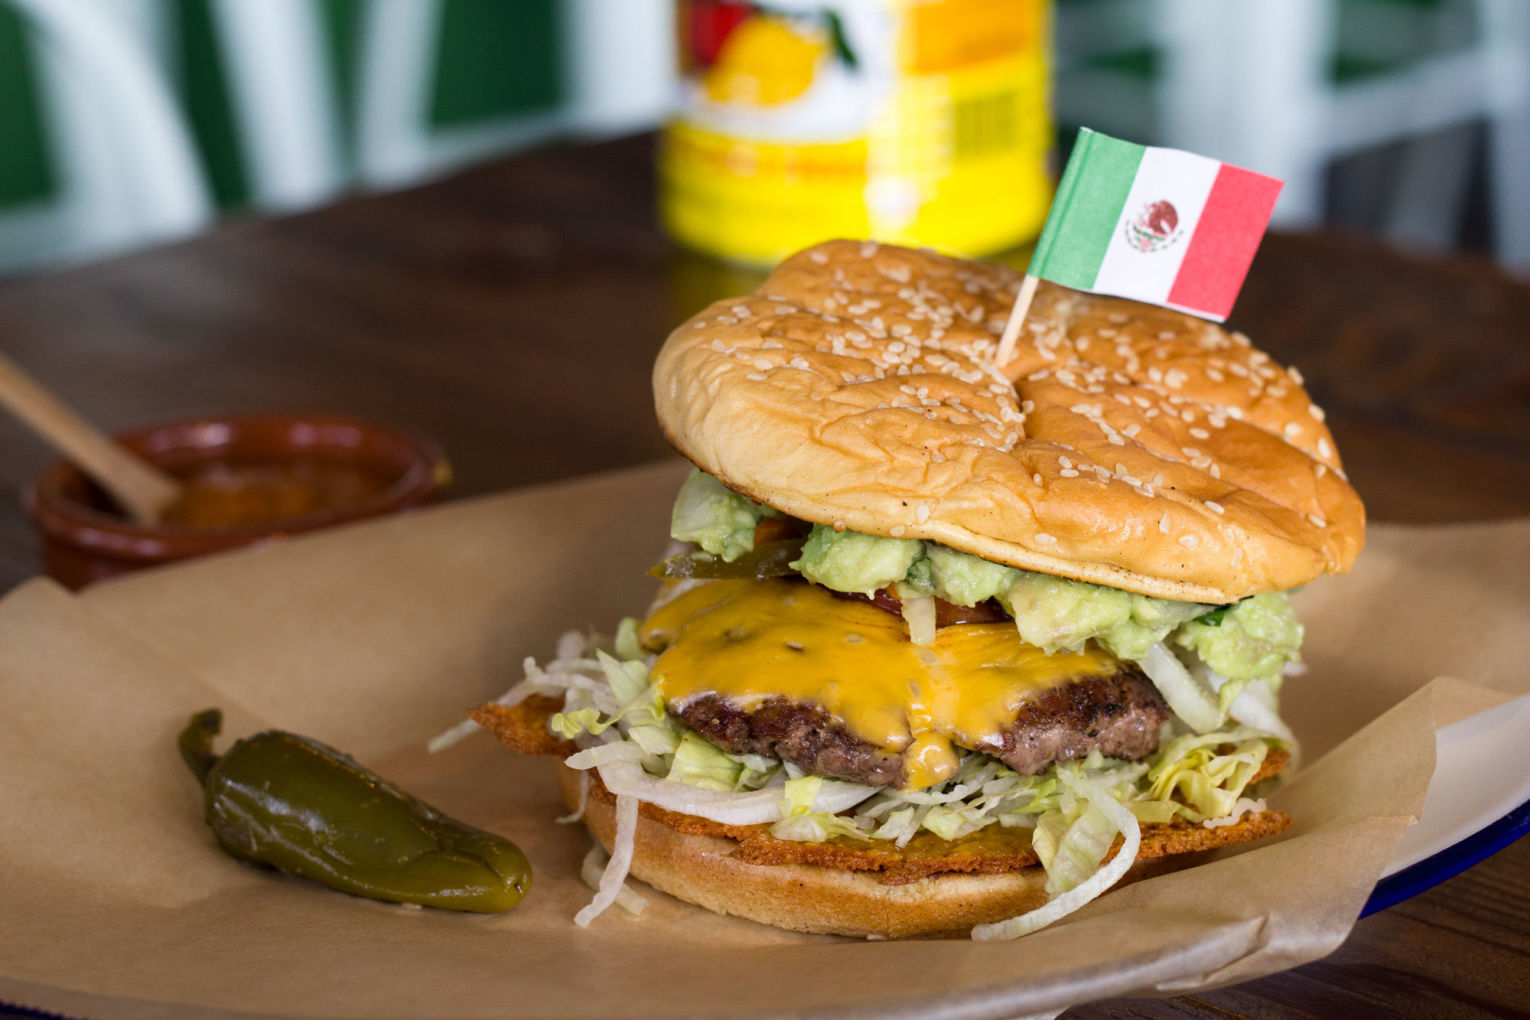 Güero’s Mexican street burger, complete with fried American cheese, habanero slaw, pickled jalapeno, tamarind-habanero-roasted tomato, and a big dollop of guacamole.